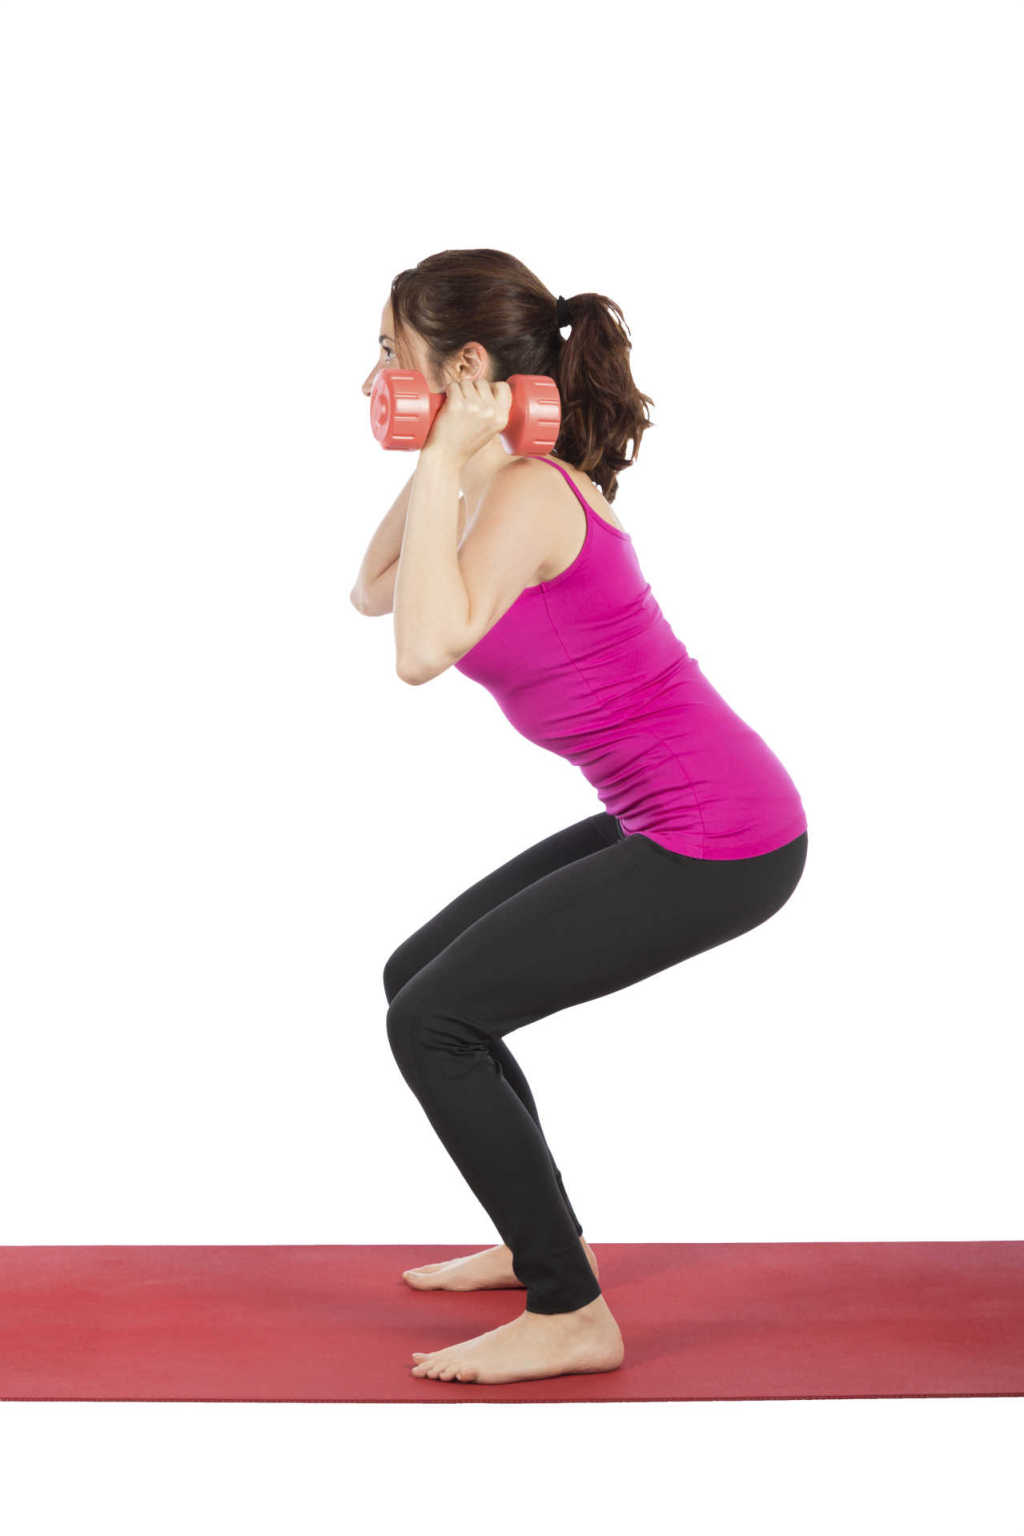 Fitness woman in squat pose with dumbbells